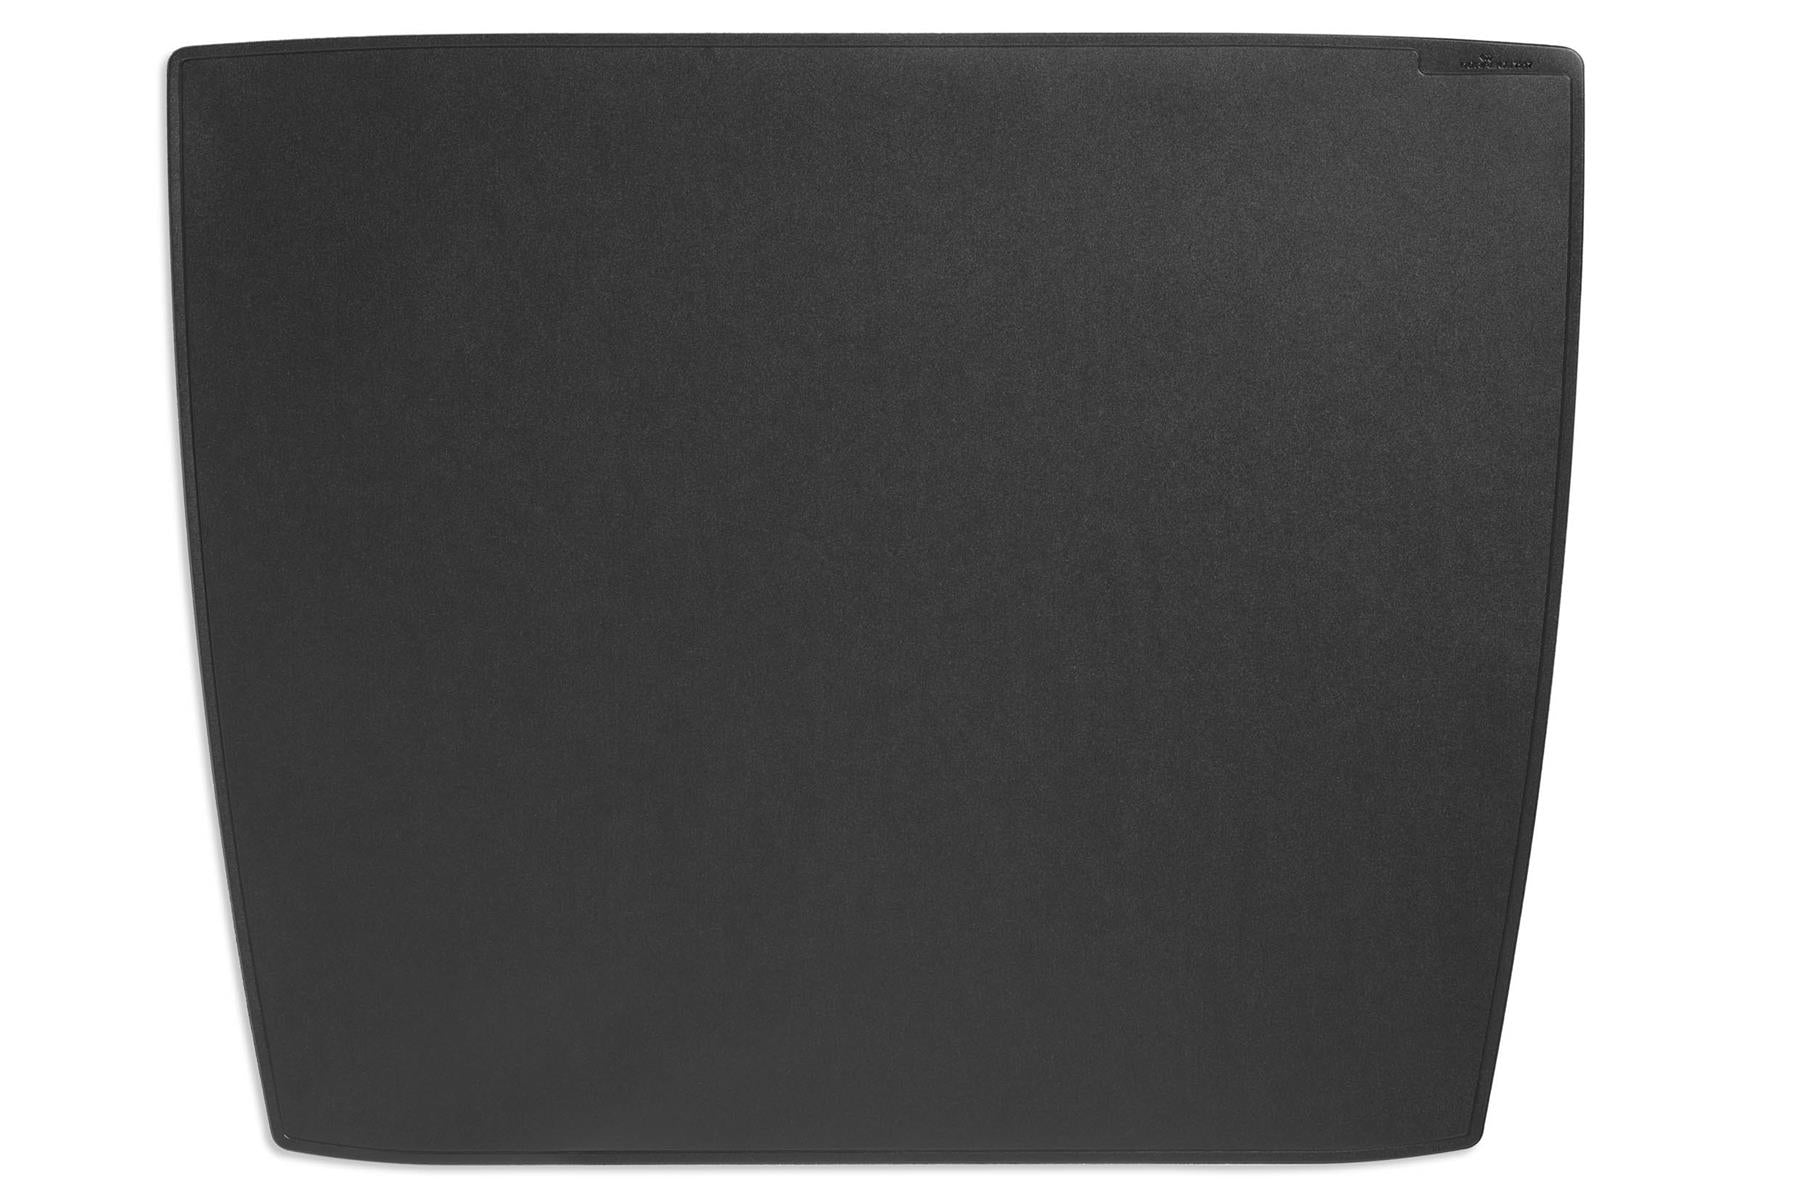 Durable Smooth Non-Slip Desk Mat PC Keyboard Mouse Pad | 65x52 cm | Black